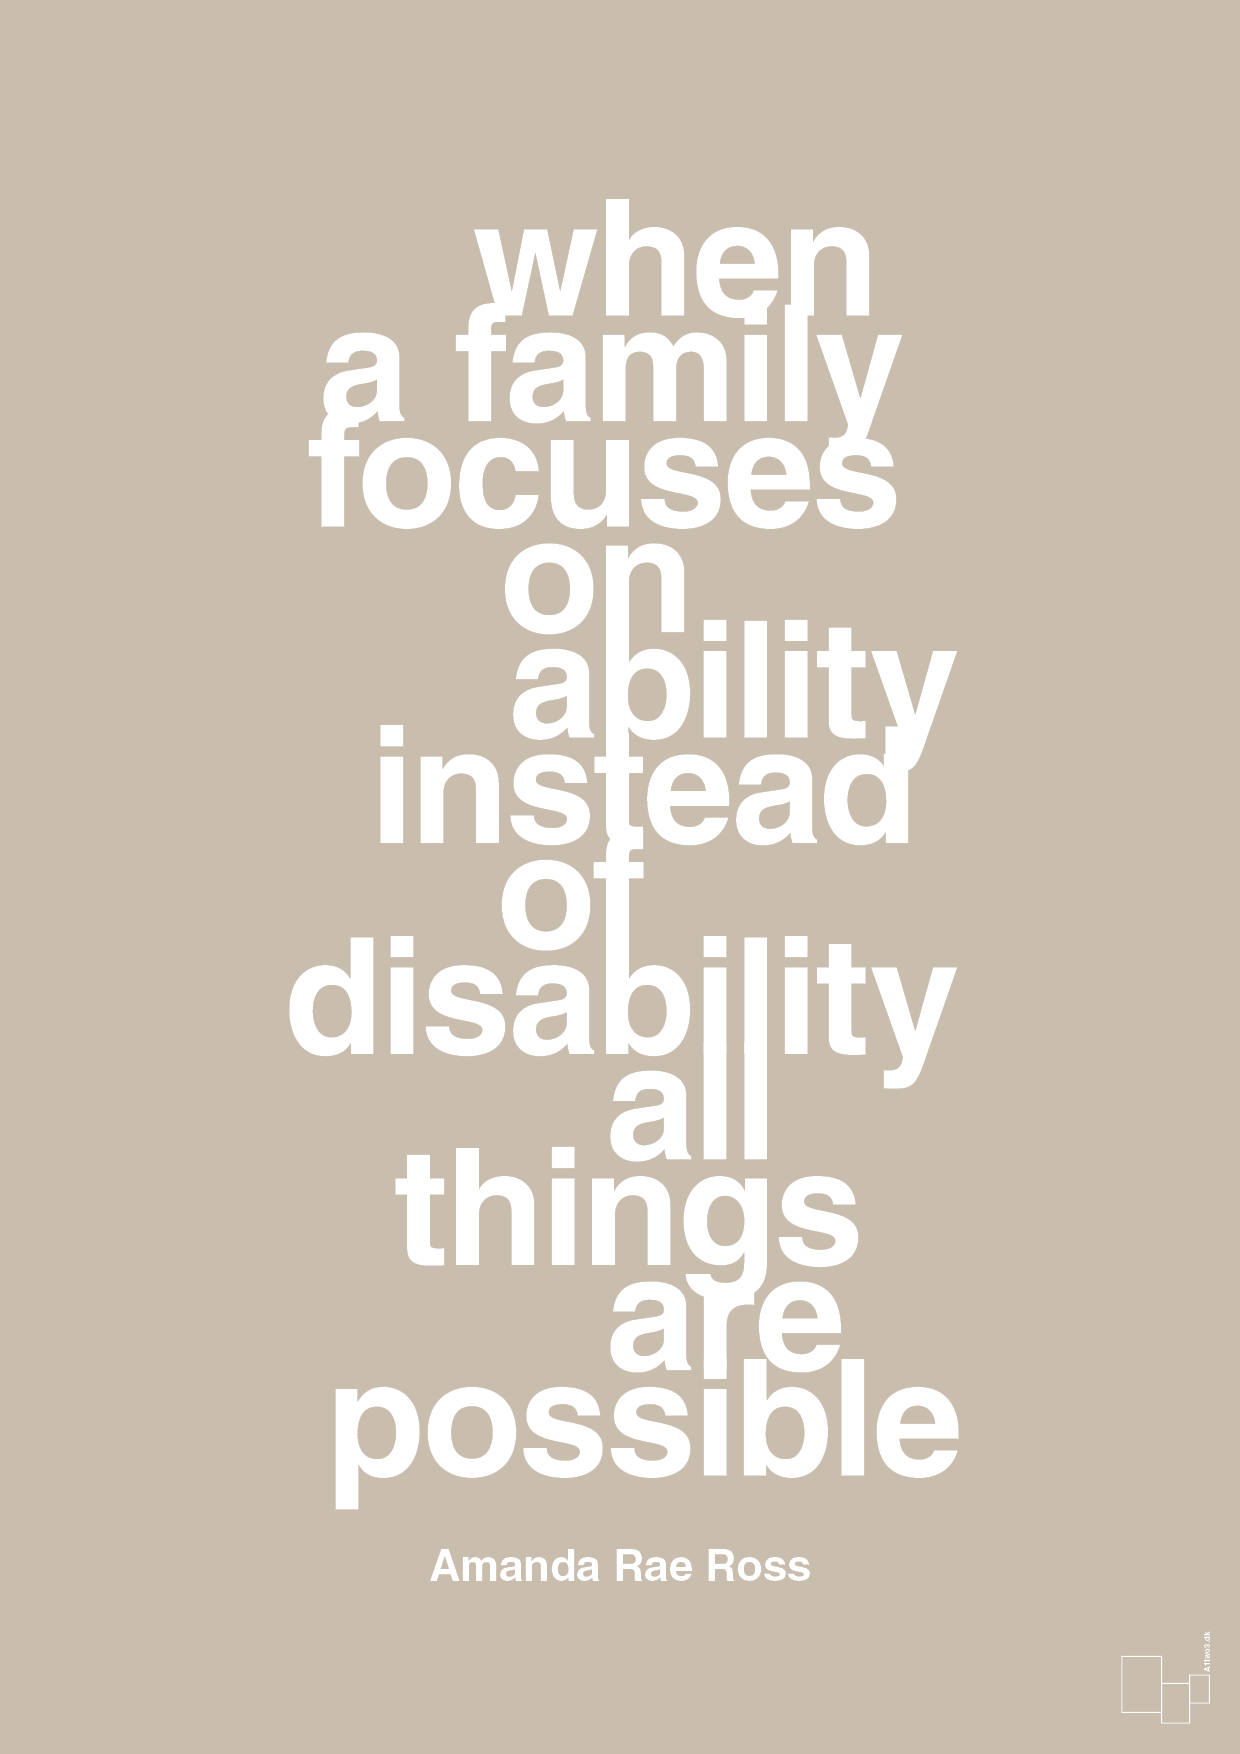 when a family focuses on ability instead of disability all things are possible - Plakat med Samfund i Creamy Mushroom